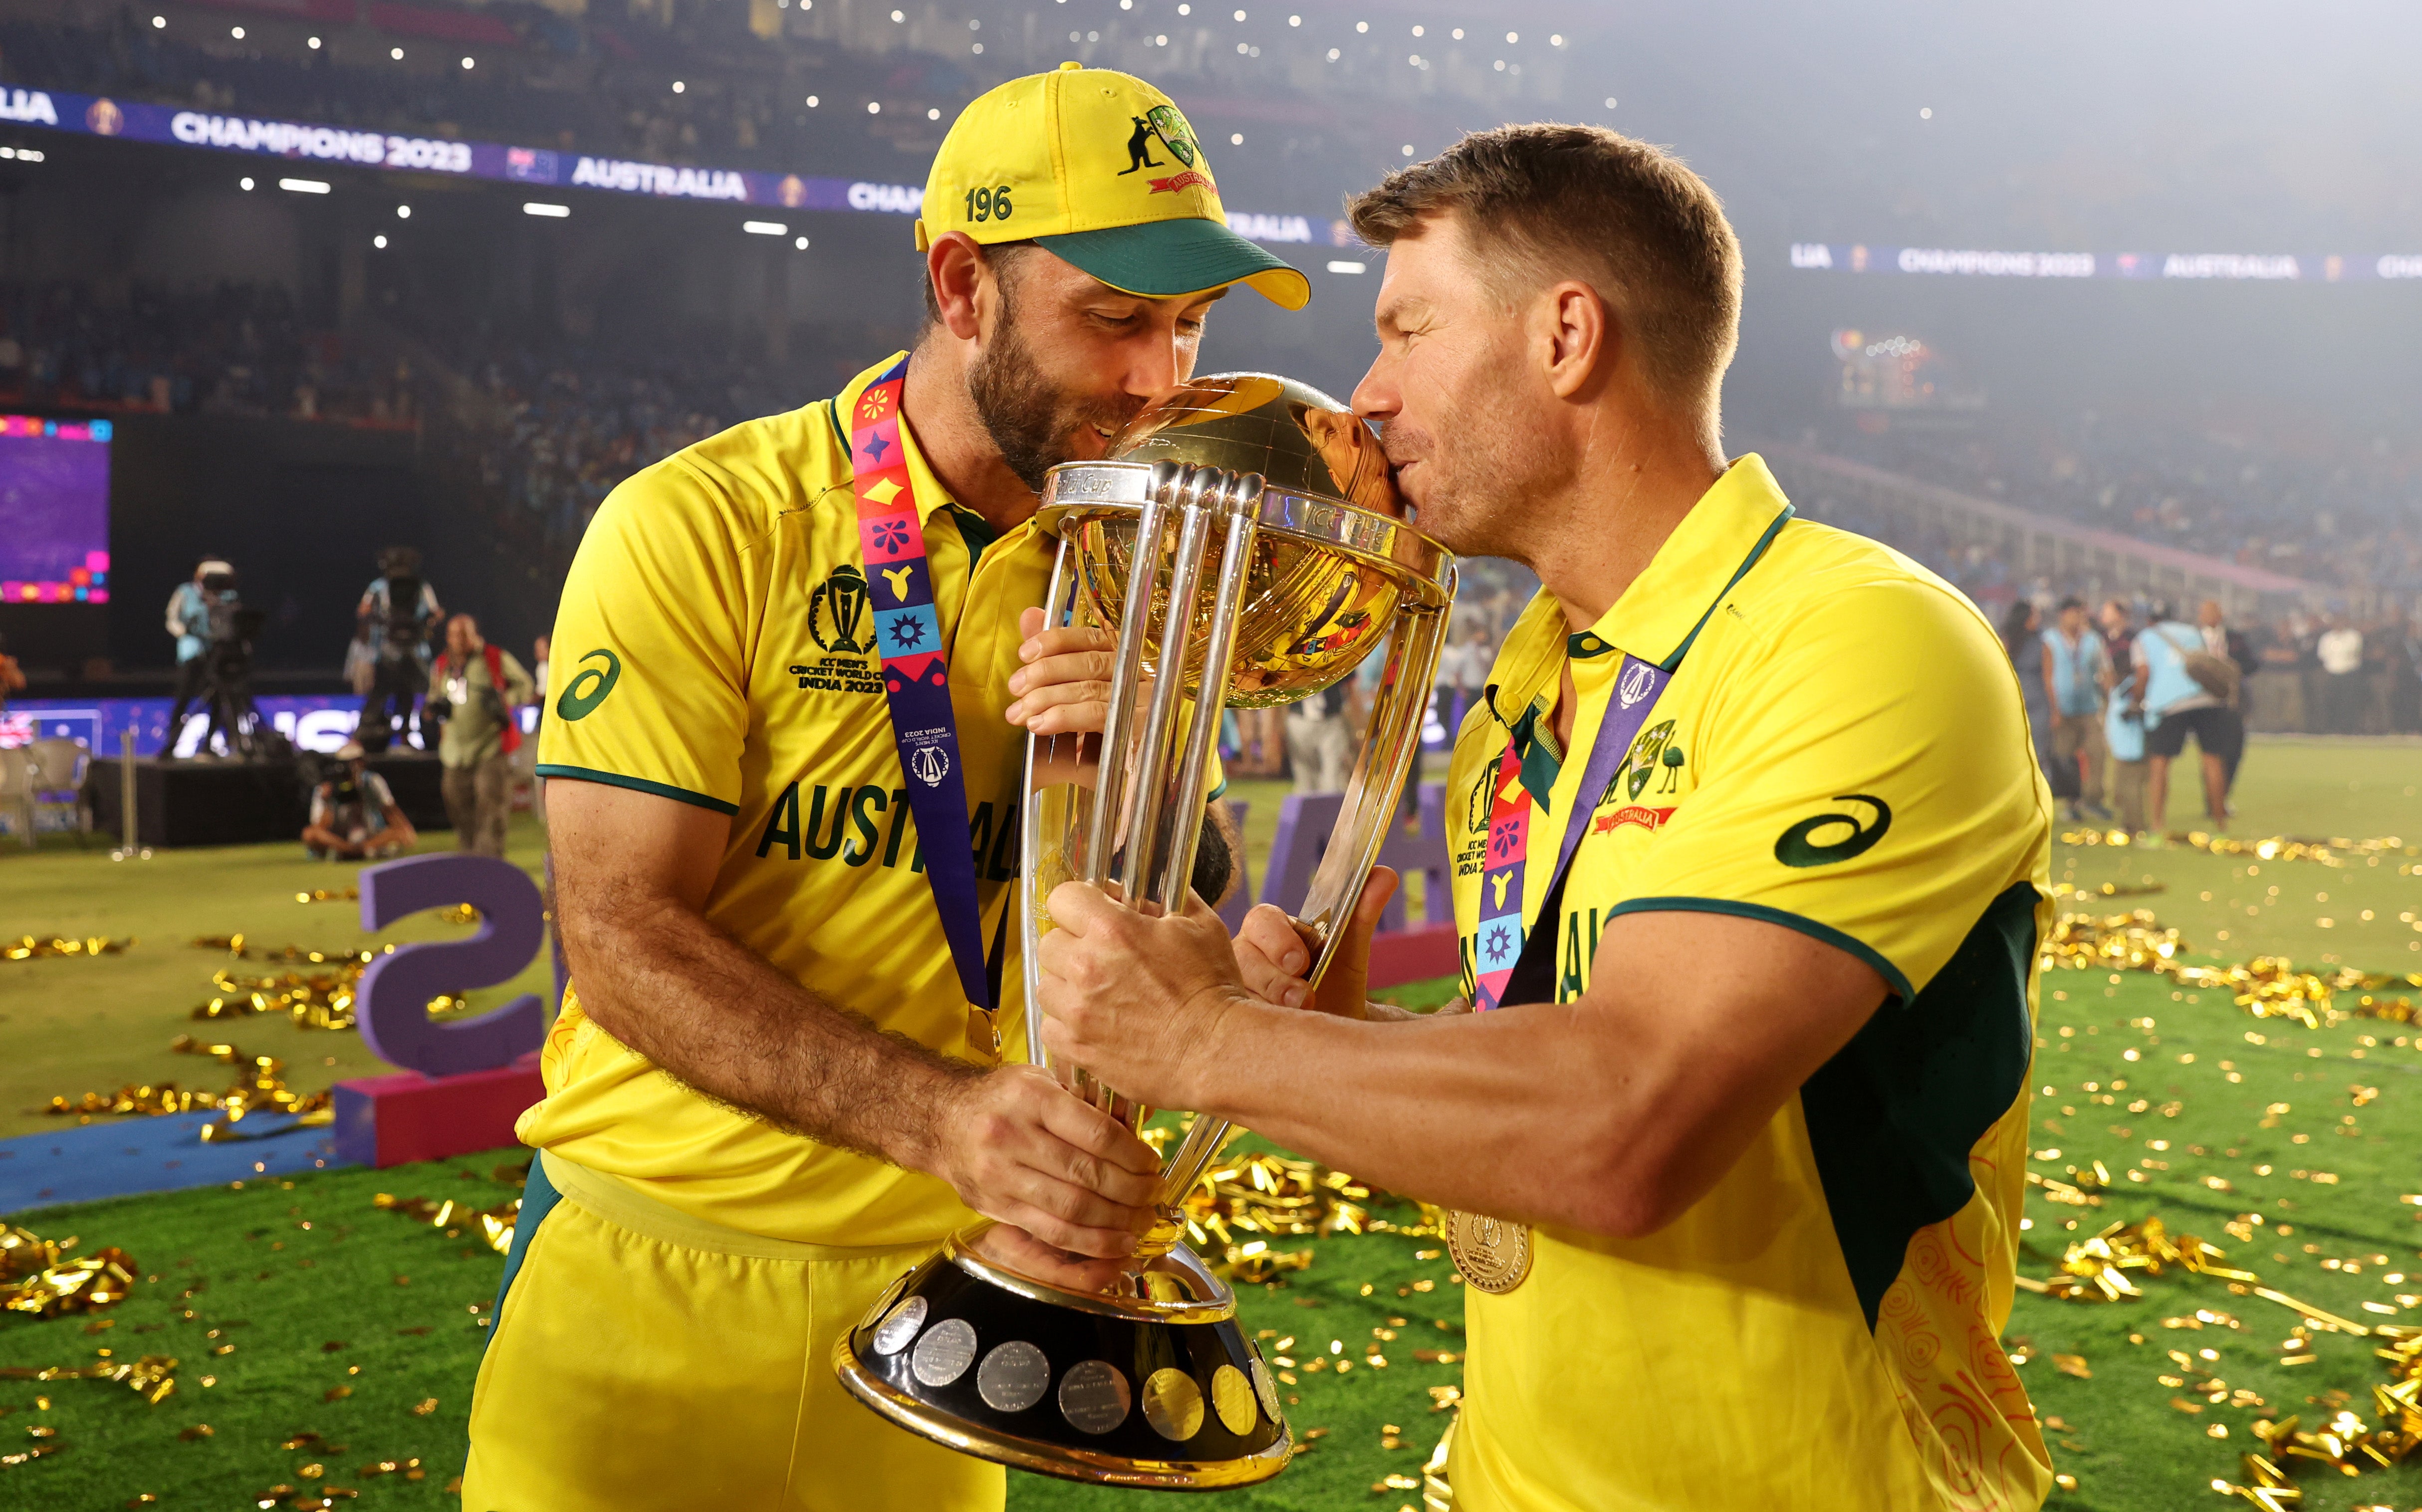 David Warner hints at extending Australia career after winning World Cup | The Independent